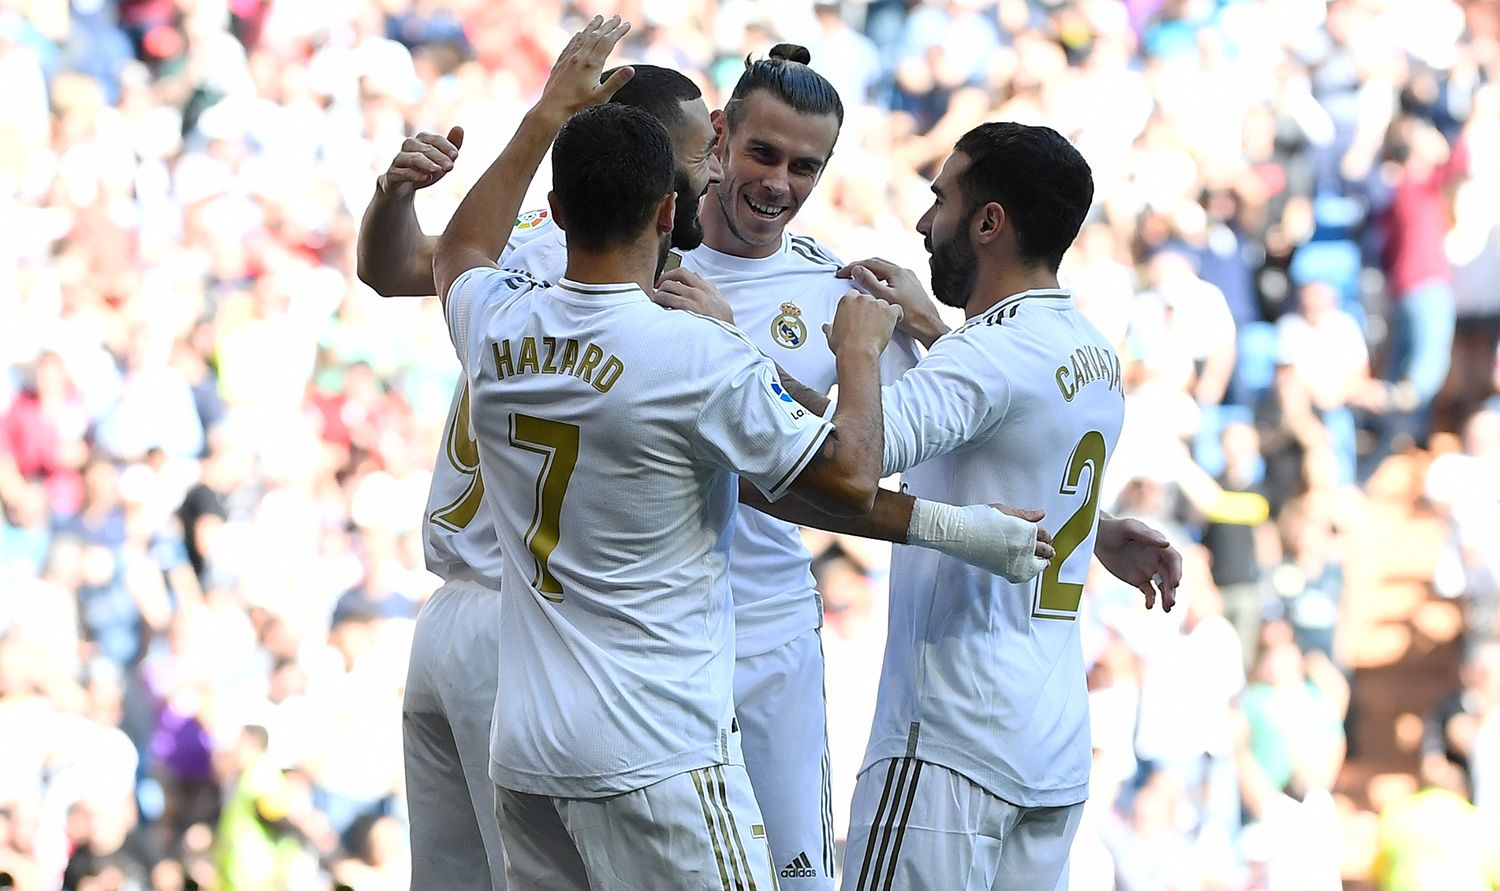 The players of the Real Madrid celebrate a goal